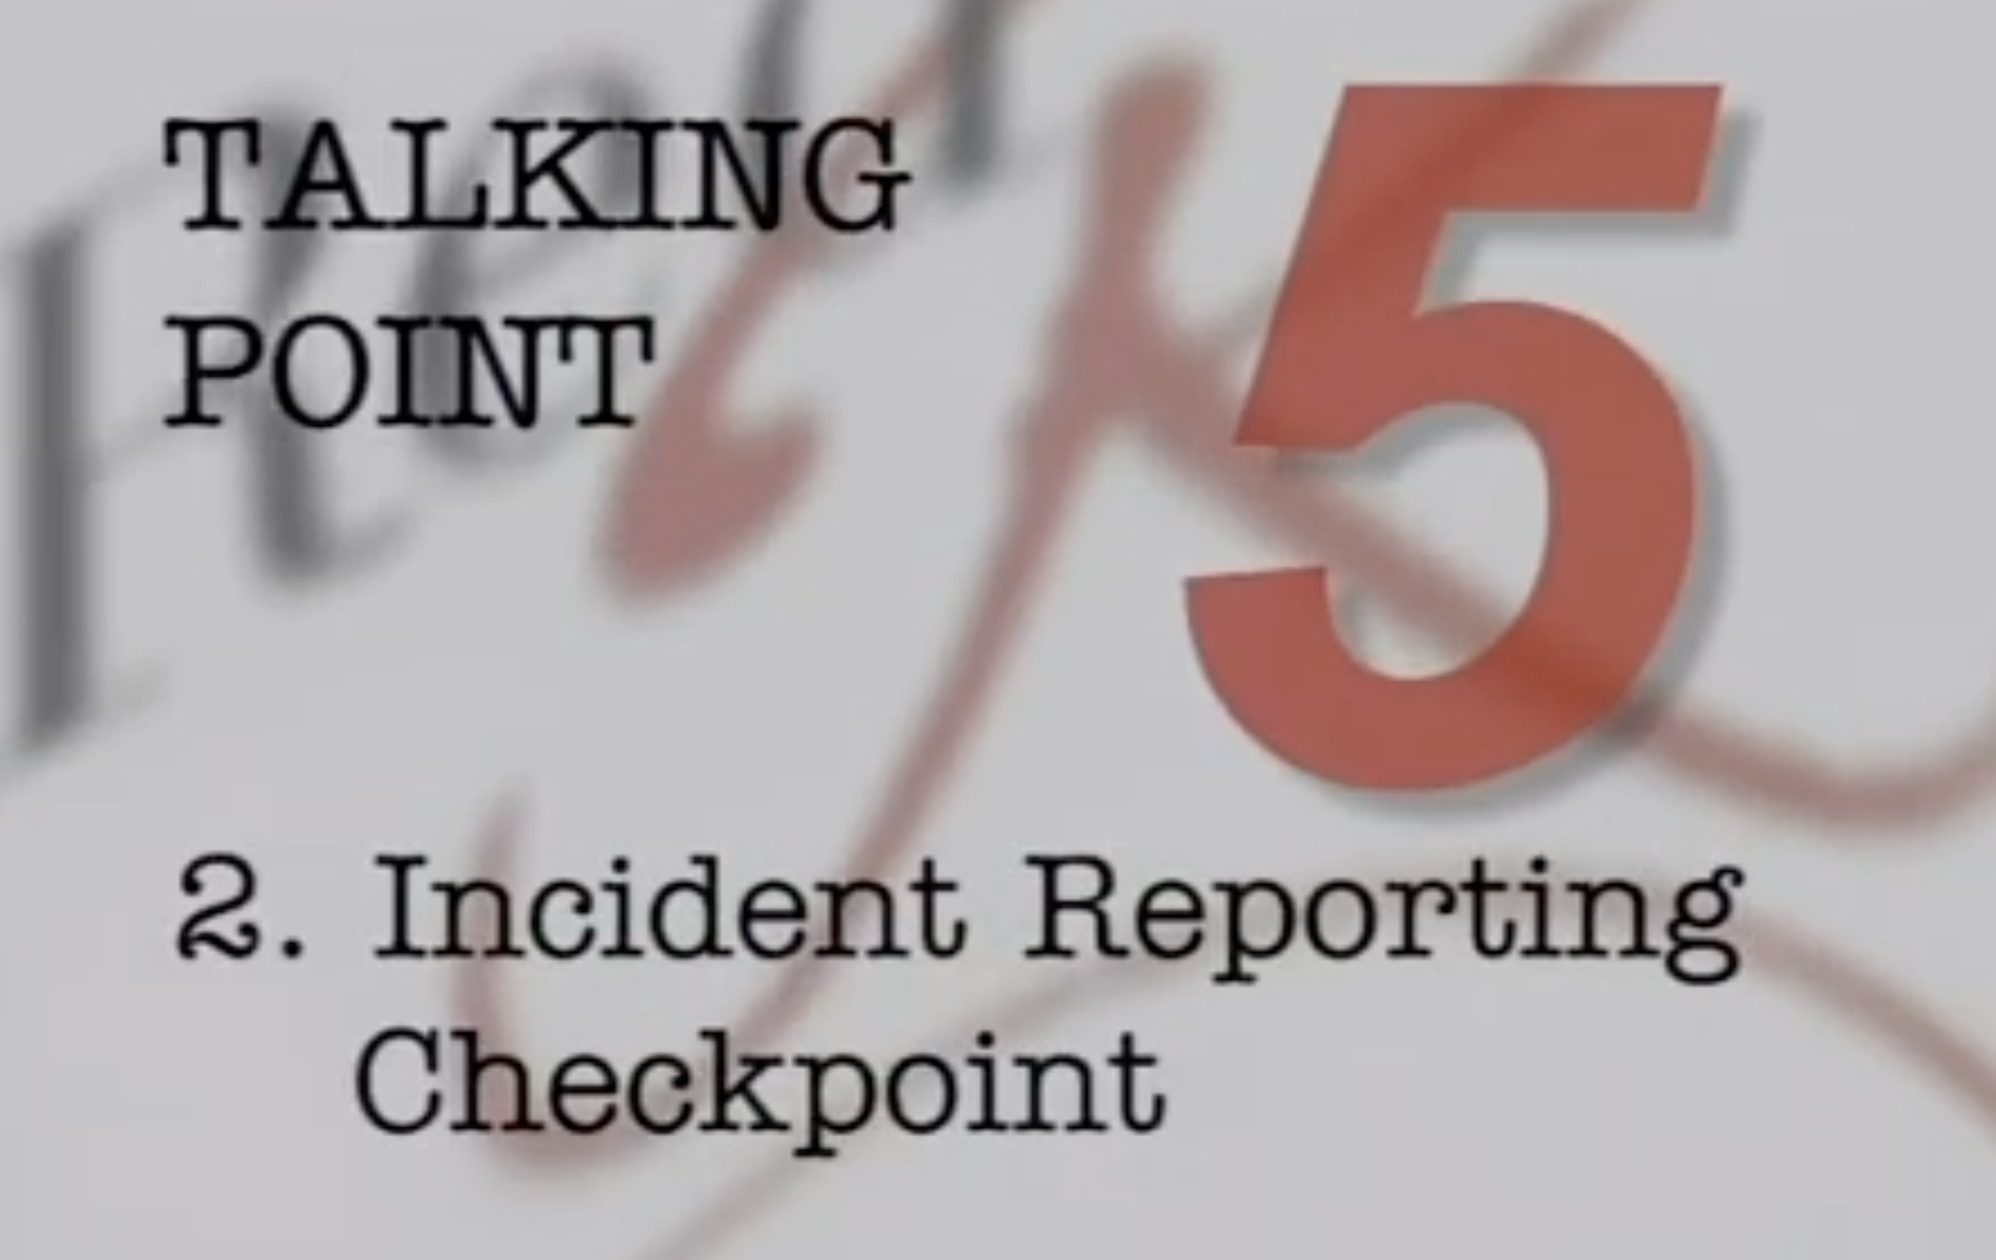 Incident Reporting - Checkpoint